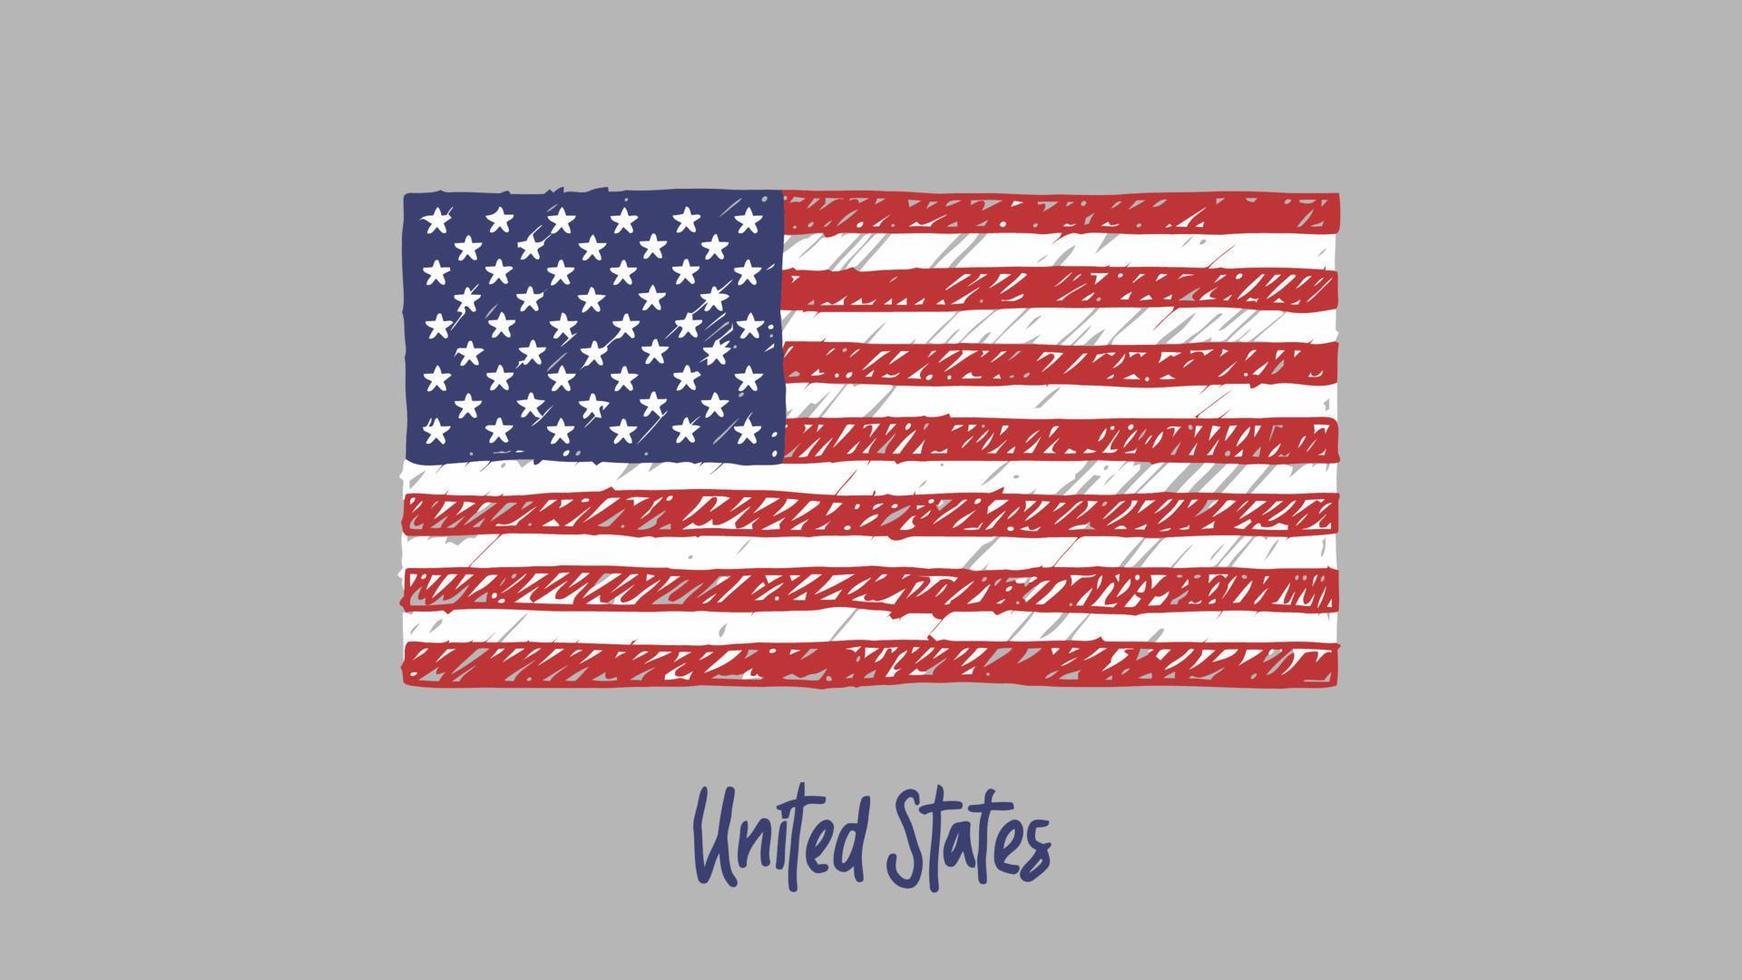 United States National Country Flag Marker or Pencil Sketch Illustration Vector